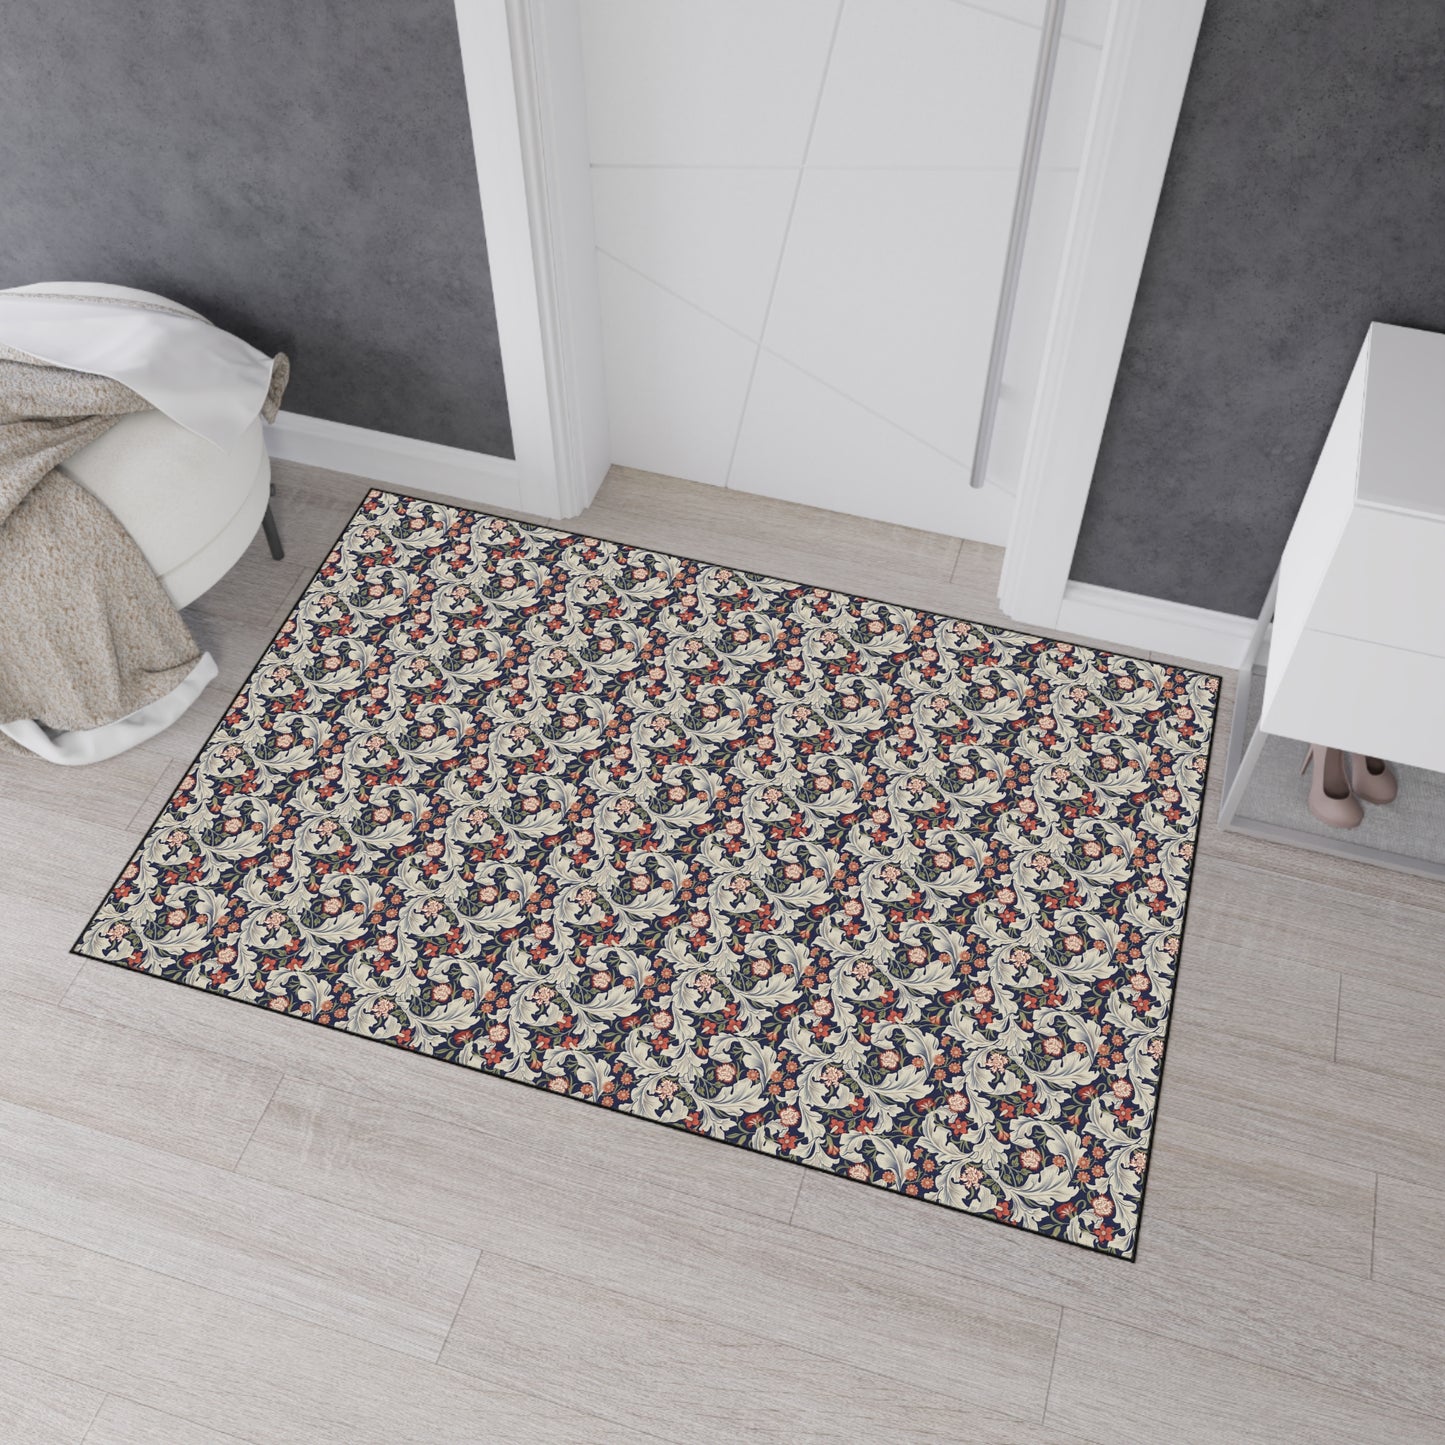 william-morris-co-heavy-duty-floor-mat-leicester-collection-royal-9